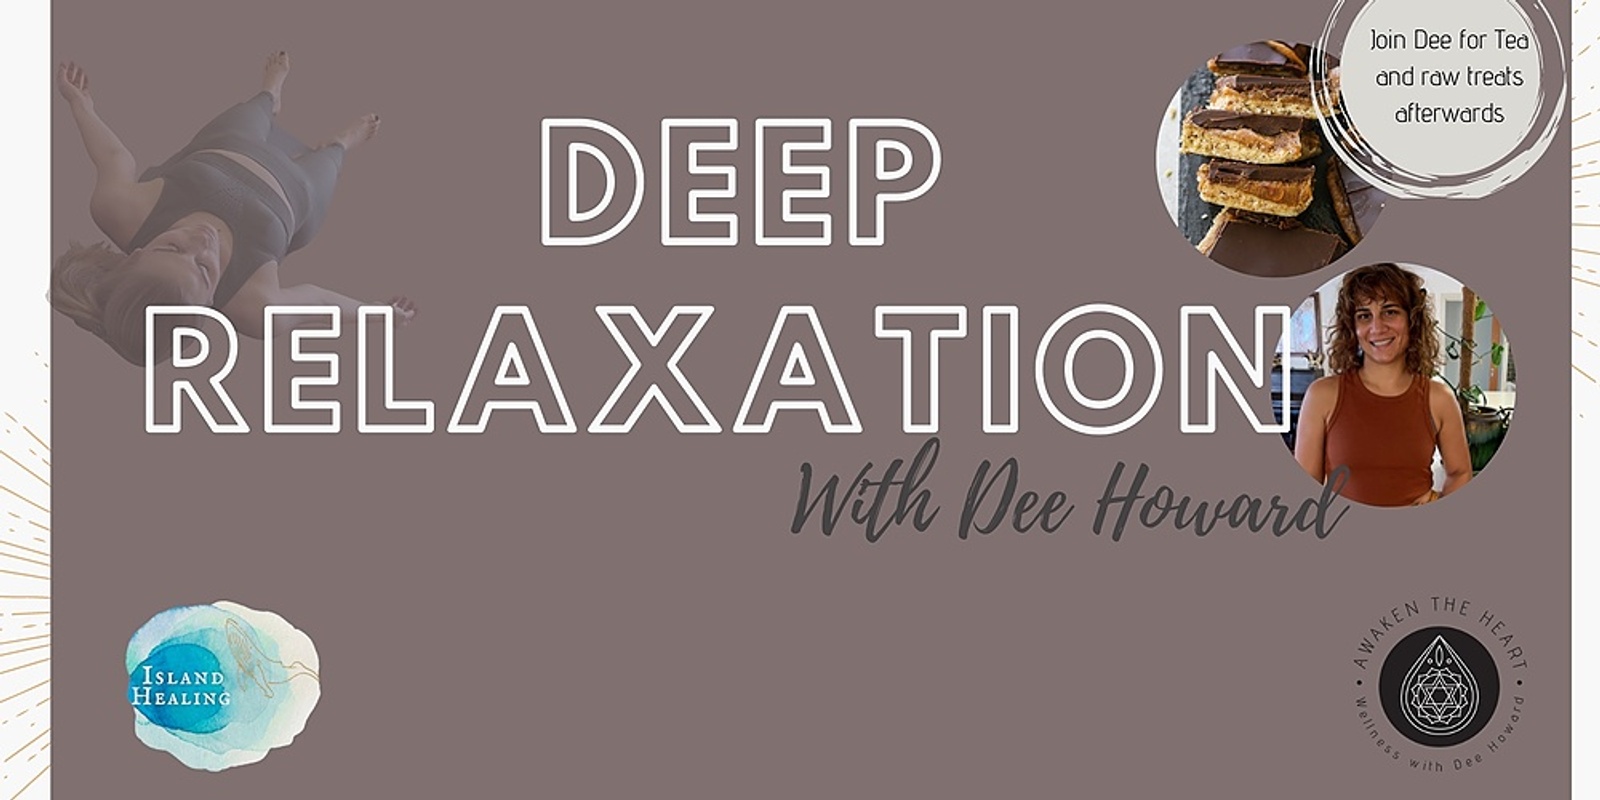 Banner image for Deep Relaxation Workshop Island Healing Newhaven 